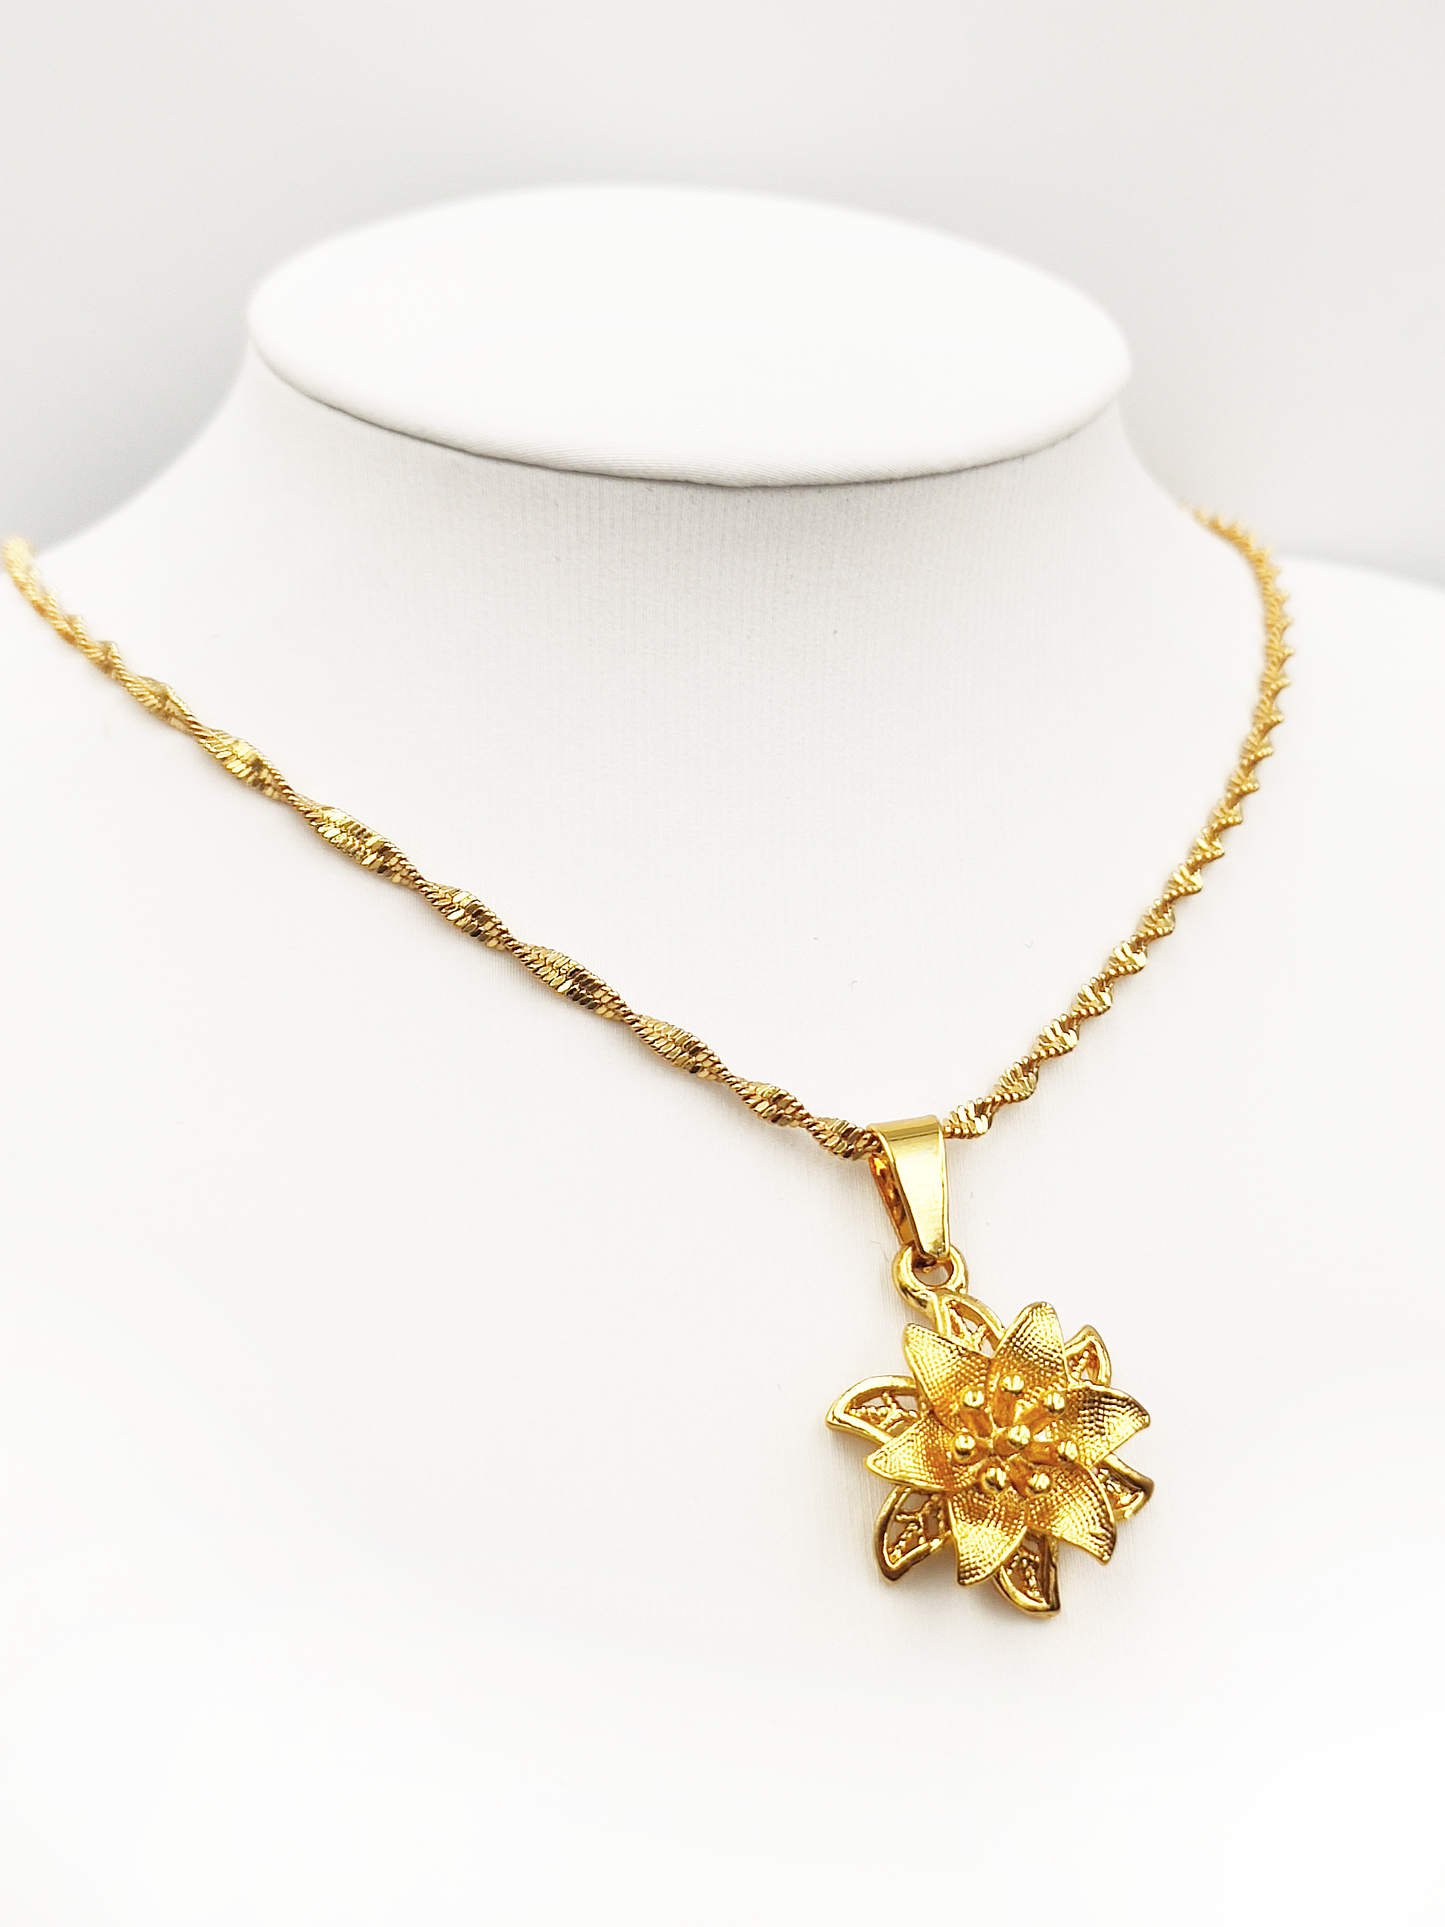 Titanium/Gold Plated flower Pendent & Chain set ($66 take away)